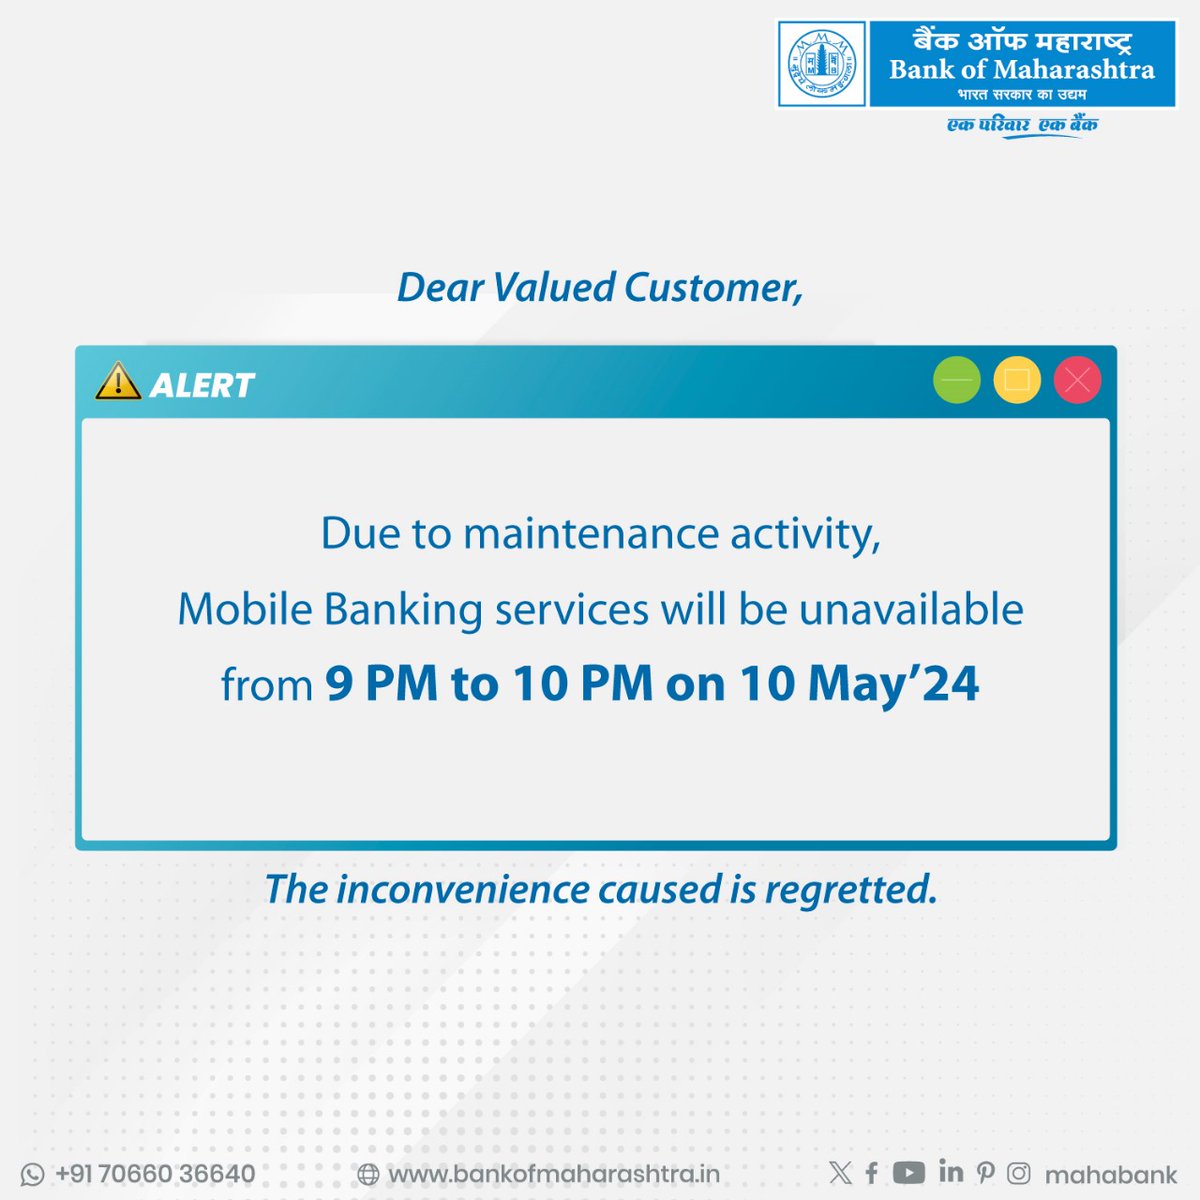 Due to maintenance activity, Mobile Banking services will be unavailable from 9 PM to 10 PM on 10 May 2024. The inconvenience caused is regretted. #BankofMaharashtra #Mahabank #alert #bankingupdates #maintenance #downtime #bankingalert